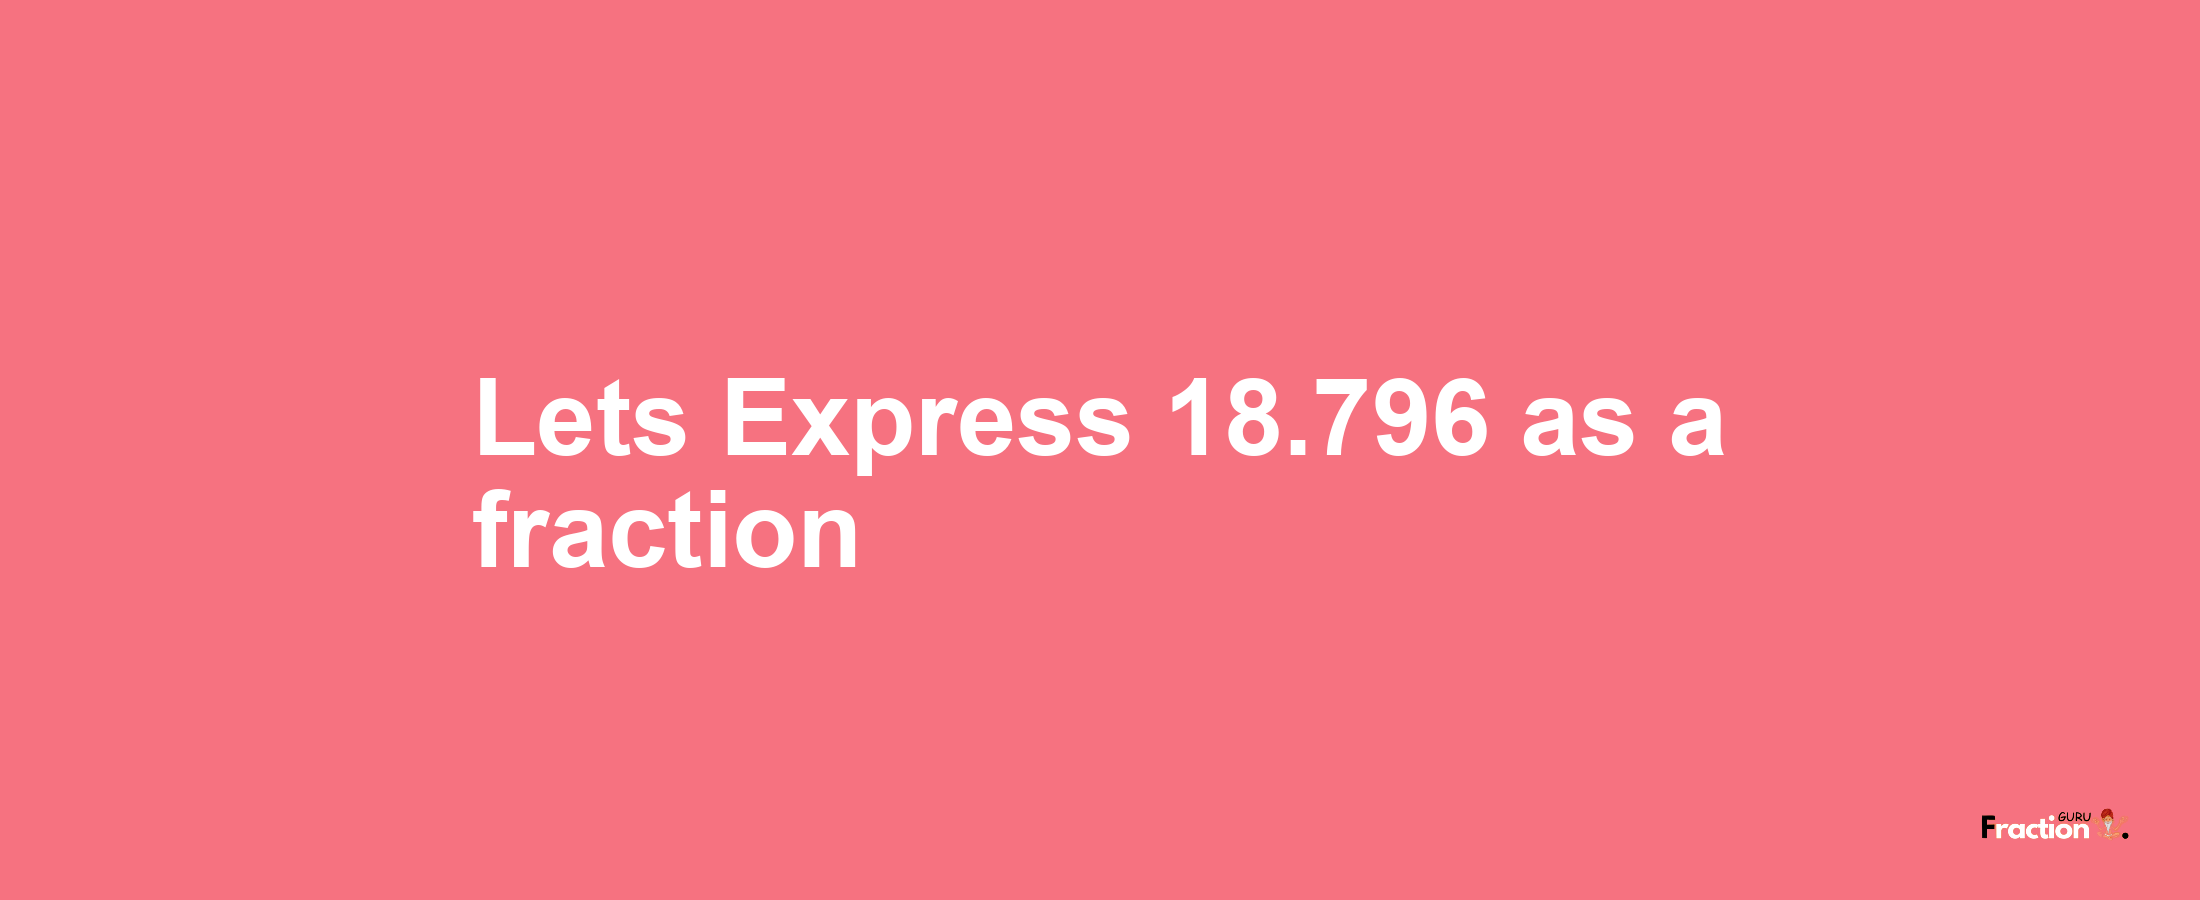 Lets Express 18.796 as afraction